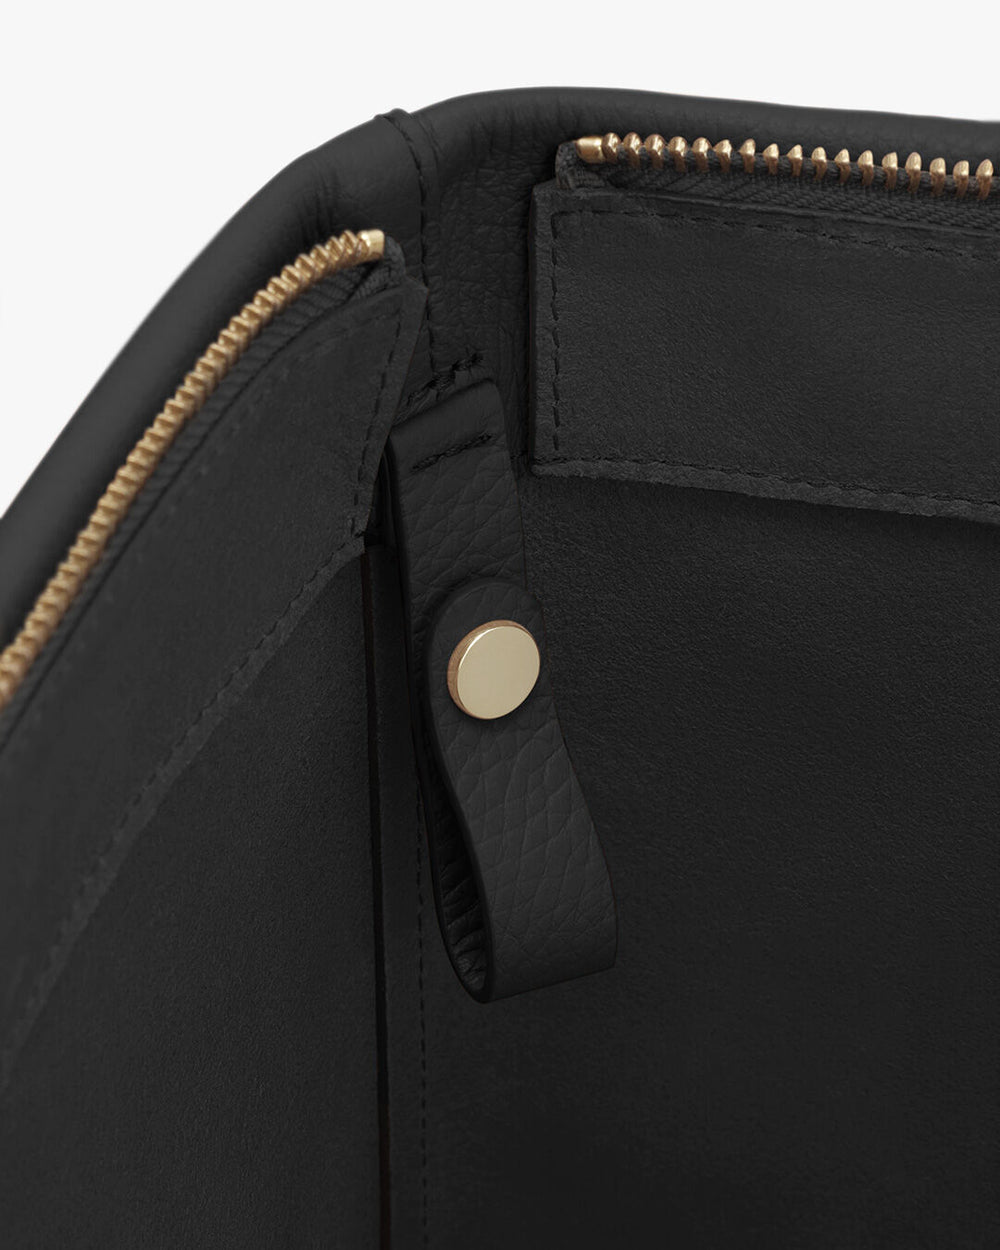 This Zippered Leather Tote Is a Versatile Carry-on Bag